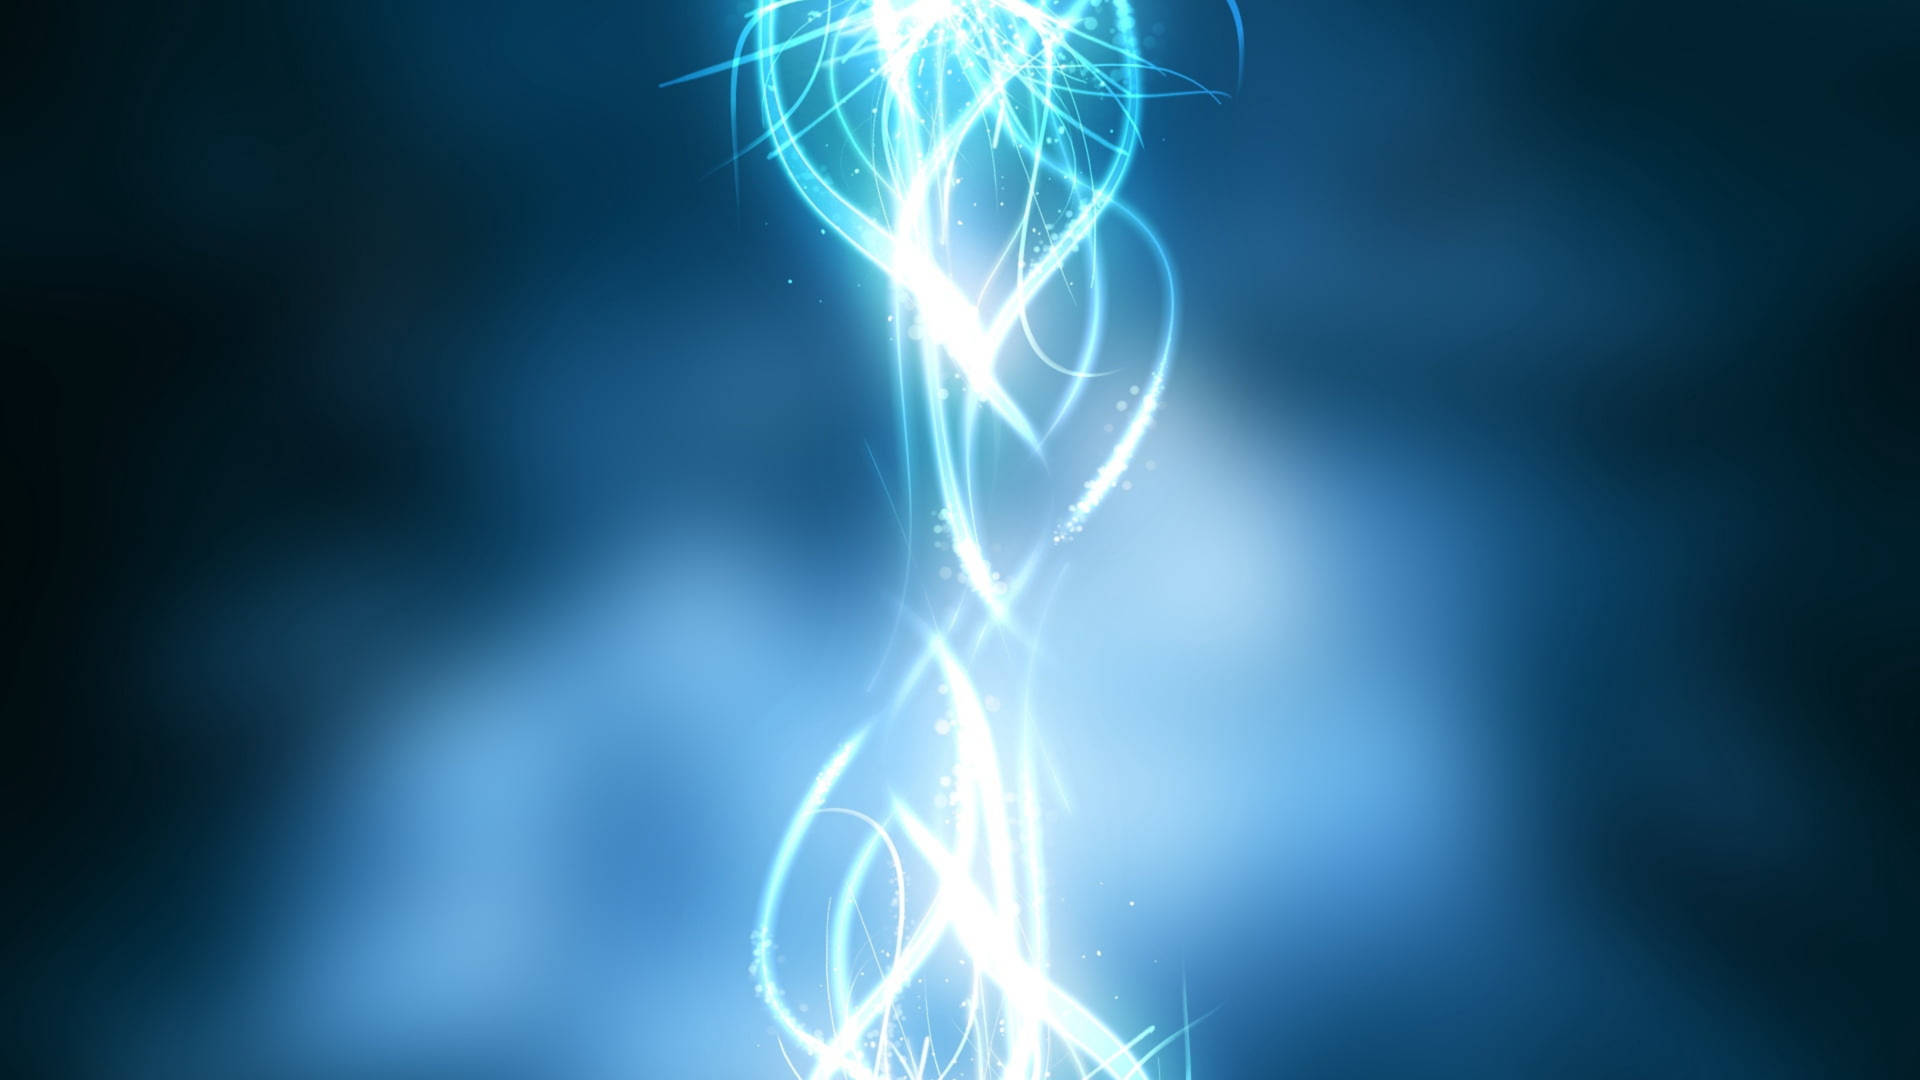 Caption: Mystical Blue Flames Dancing In The Dark Background